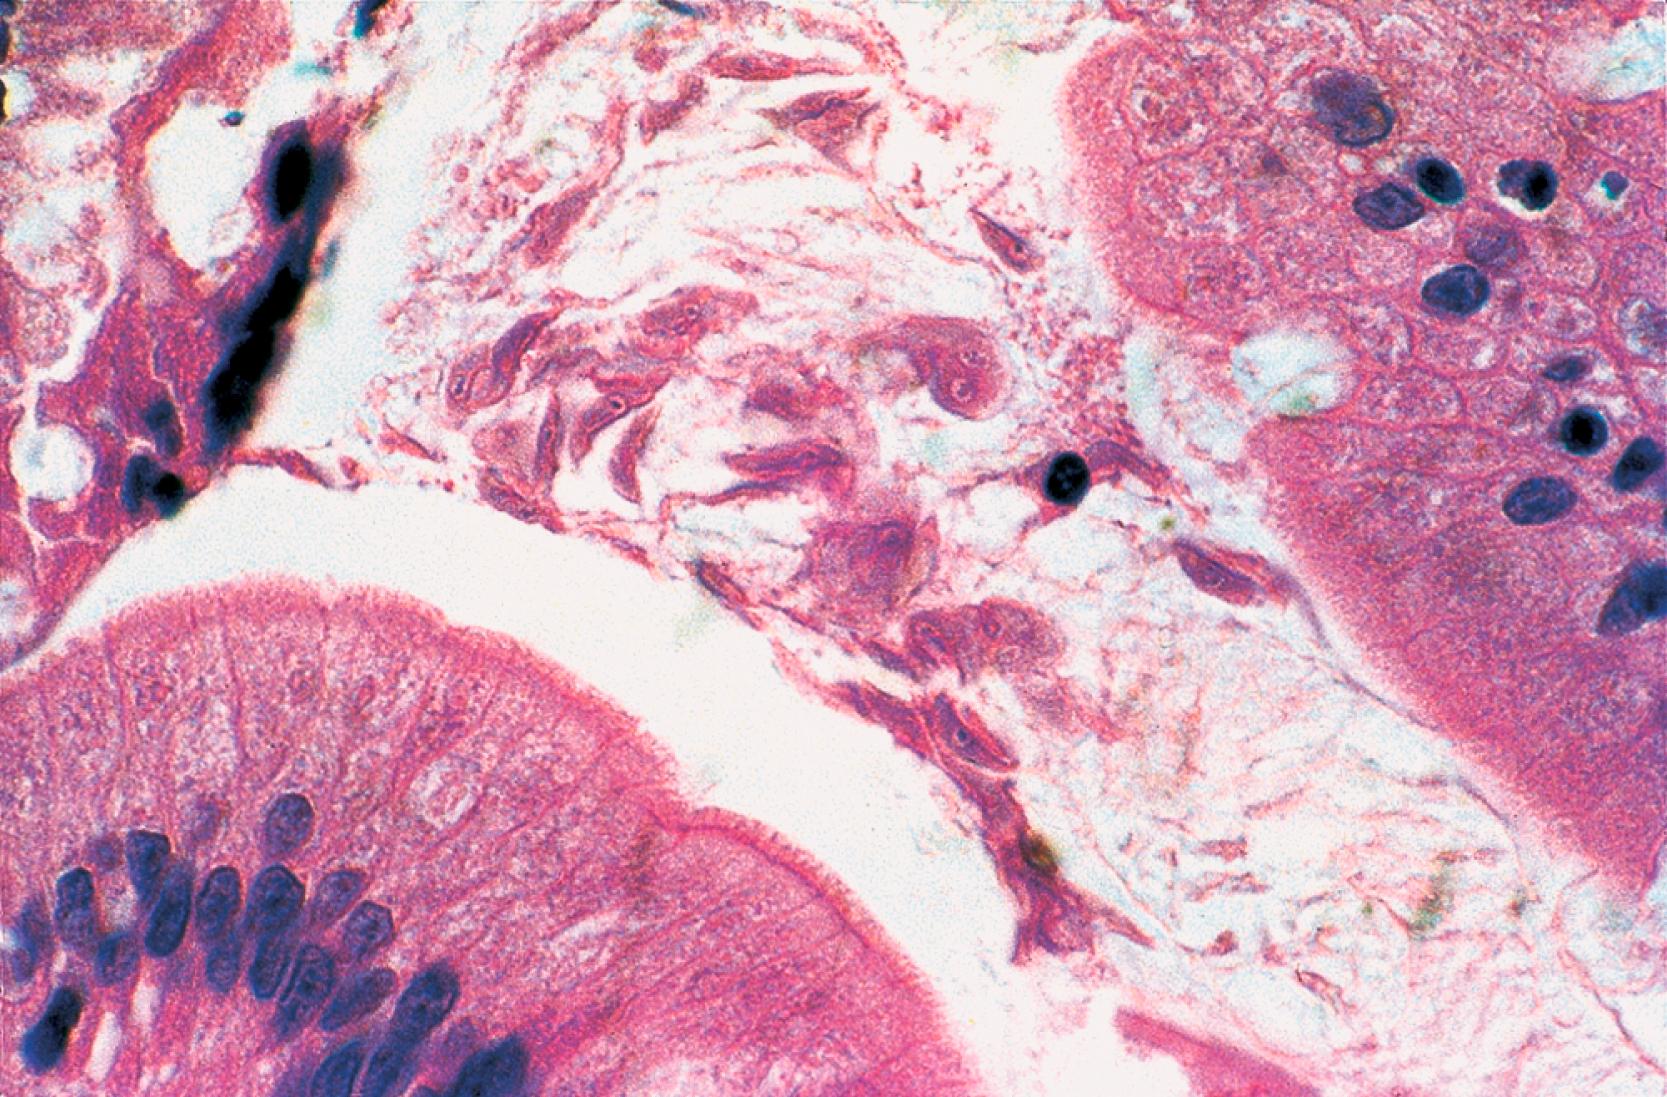 FIGURE 5.2, Giardiasis. Numerous trophozoites in varying orientations are closely associated with the surface of this small bowel biopsy specimen from a patient with common variable immunodeficiency. The underlying epithelium is normal (H&E stain).